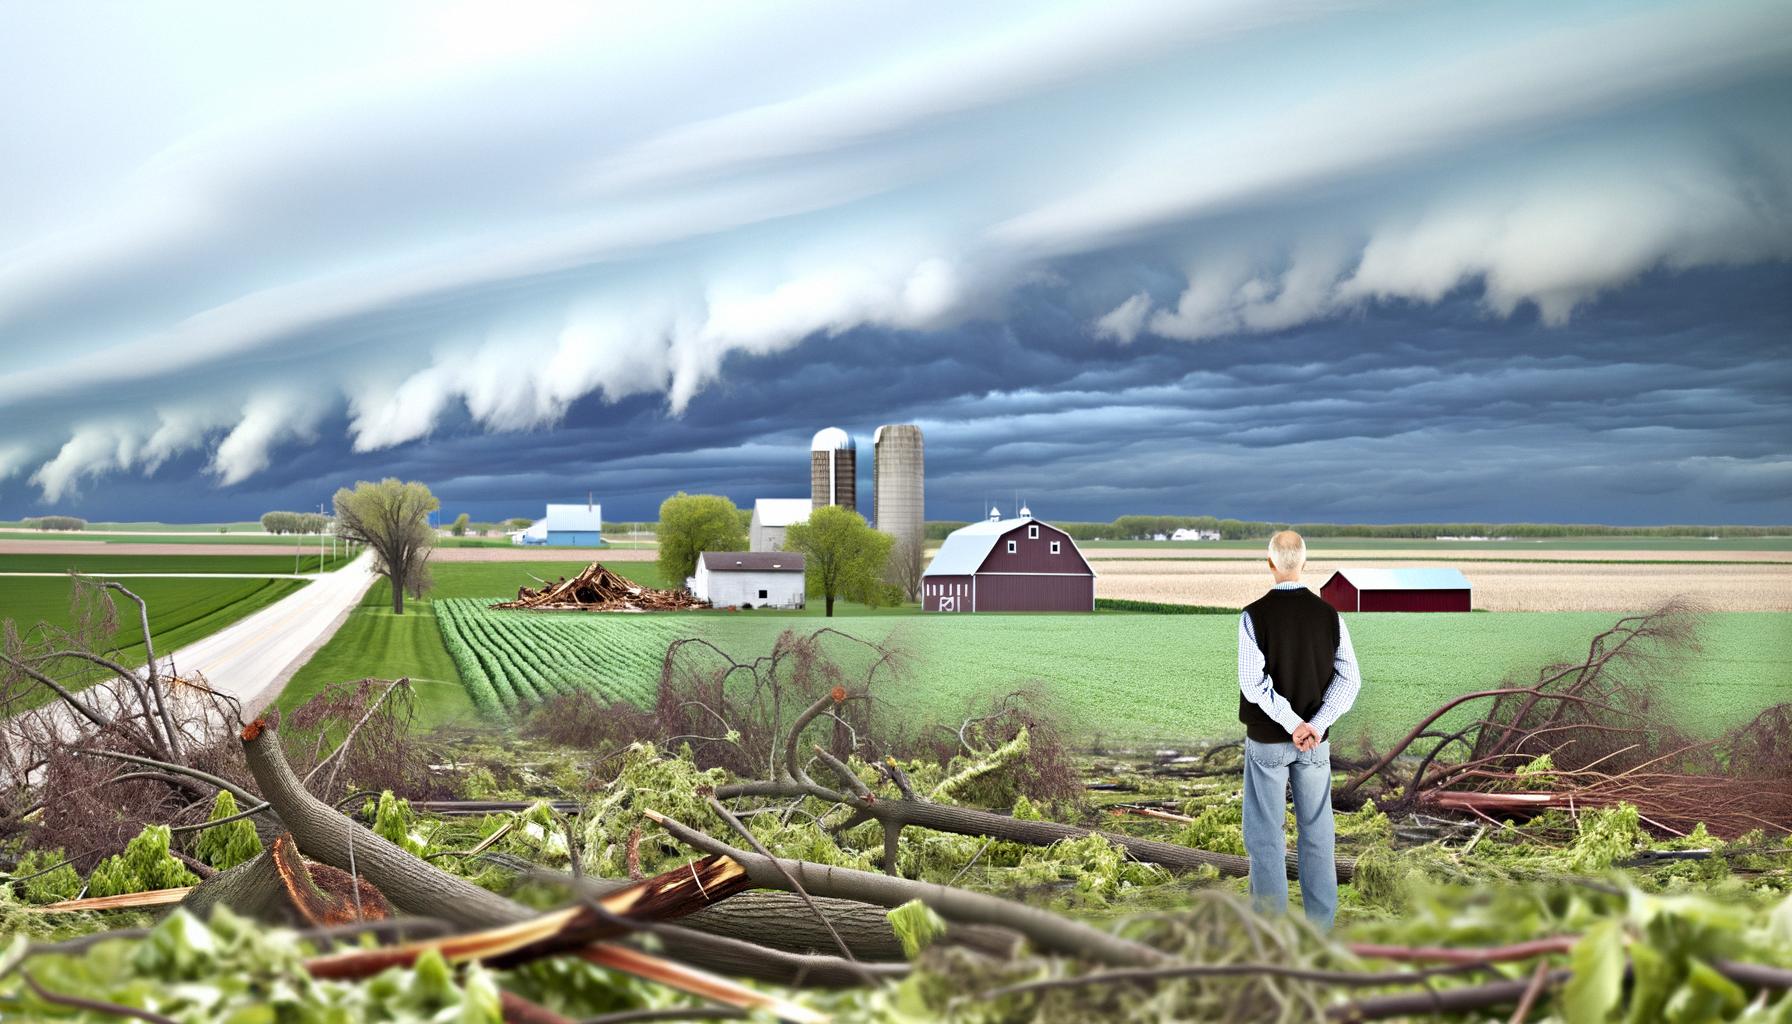 Severe weather in the Midwest causes significant damage and prompts extensive federal aid.